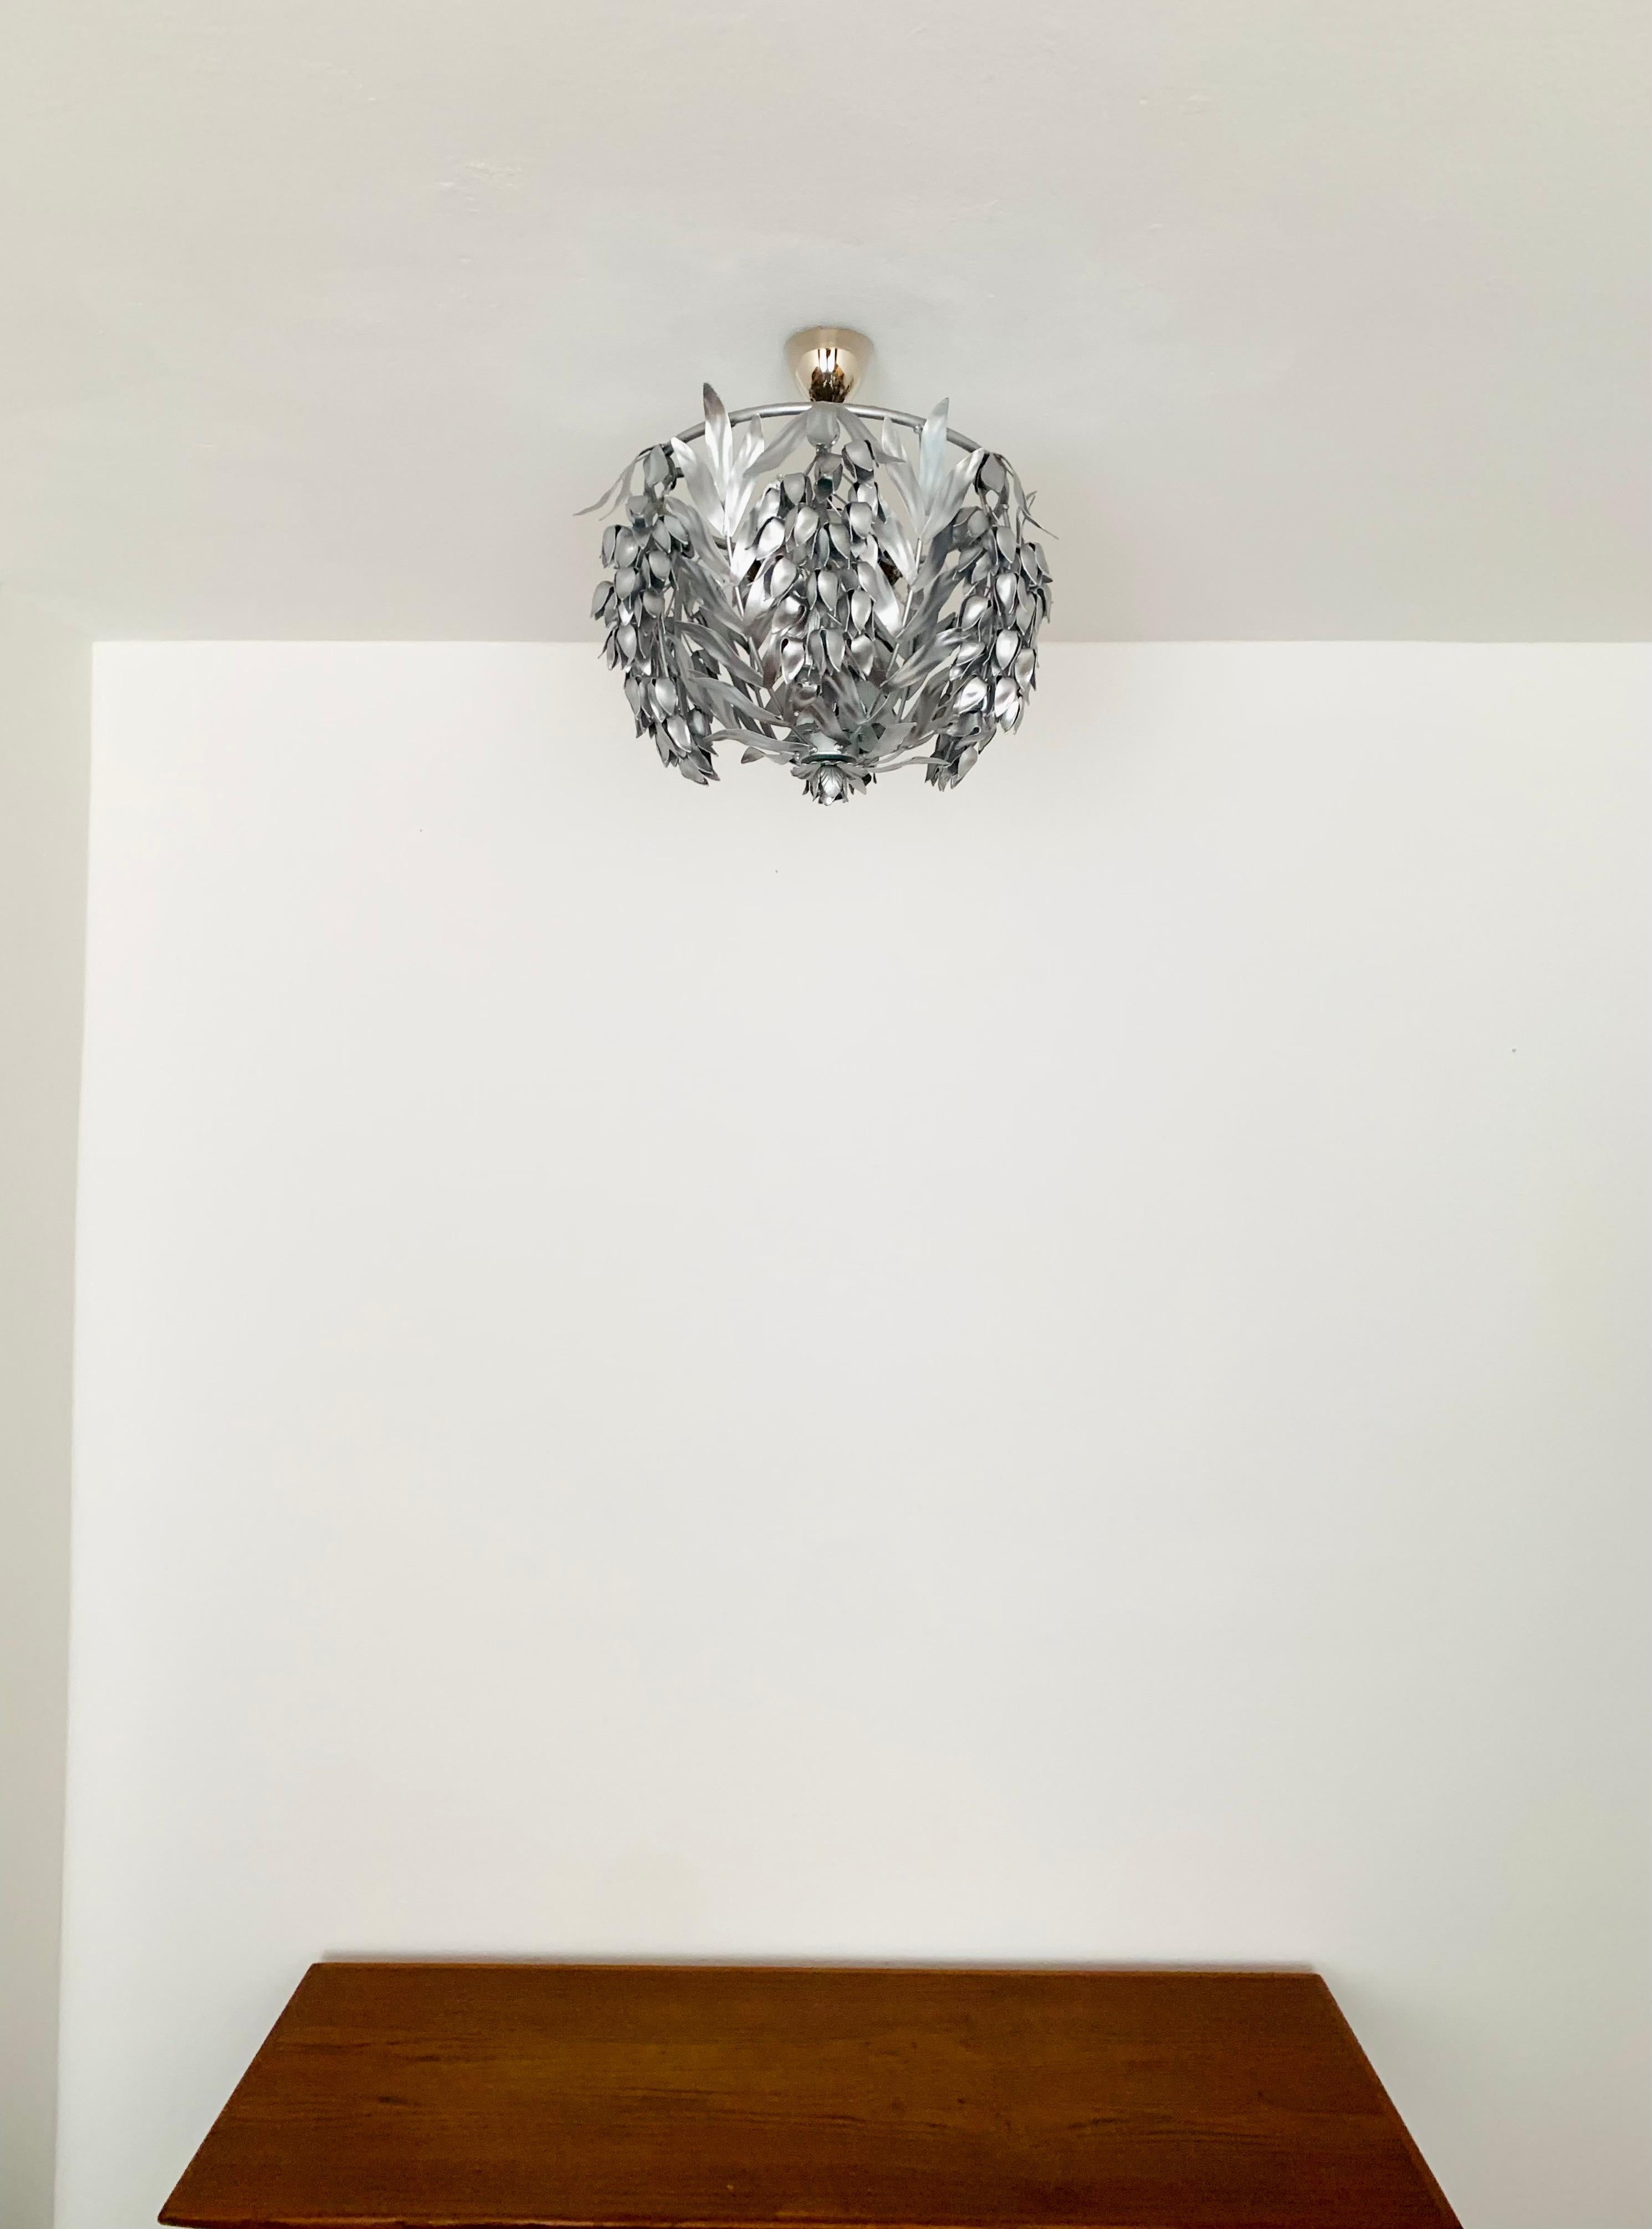 Exceptionally decorative ceiling lamp from the 1970s.
Great design and high-quality workmanship.
The leaves create a great, very noble light.

Condition:

Very good vintage condition with slight signs of wear consistent with age.
The lamp has a